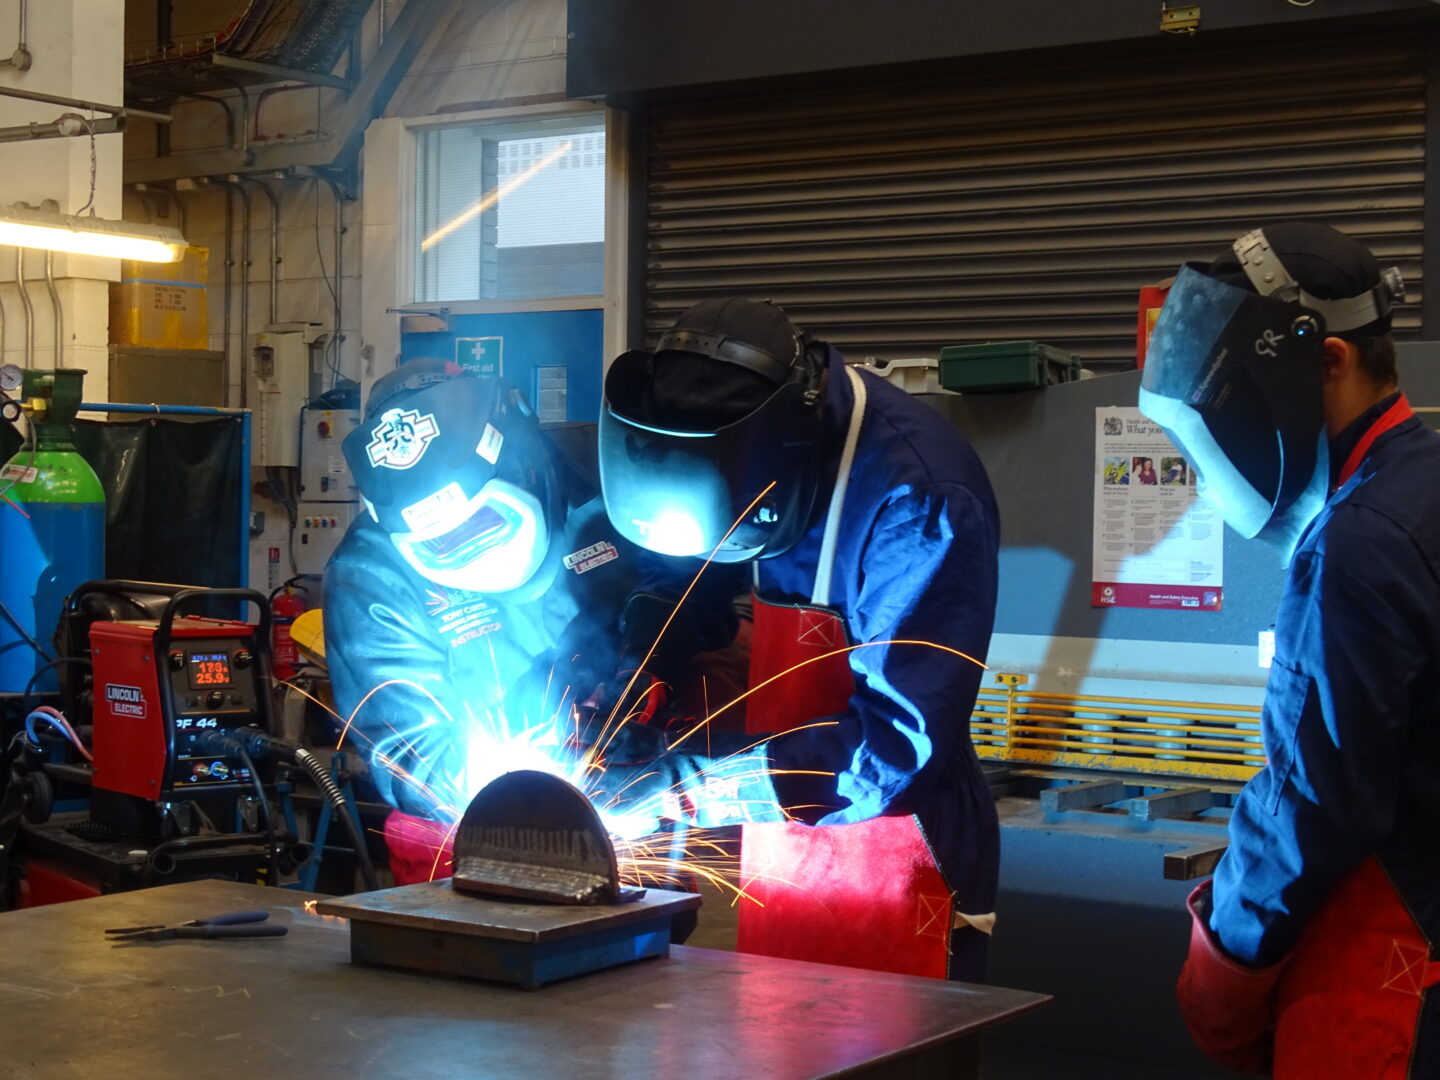 3 welding students working in a welding workshop as sparks fly